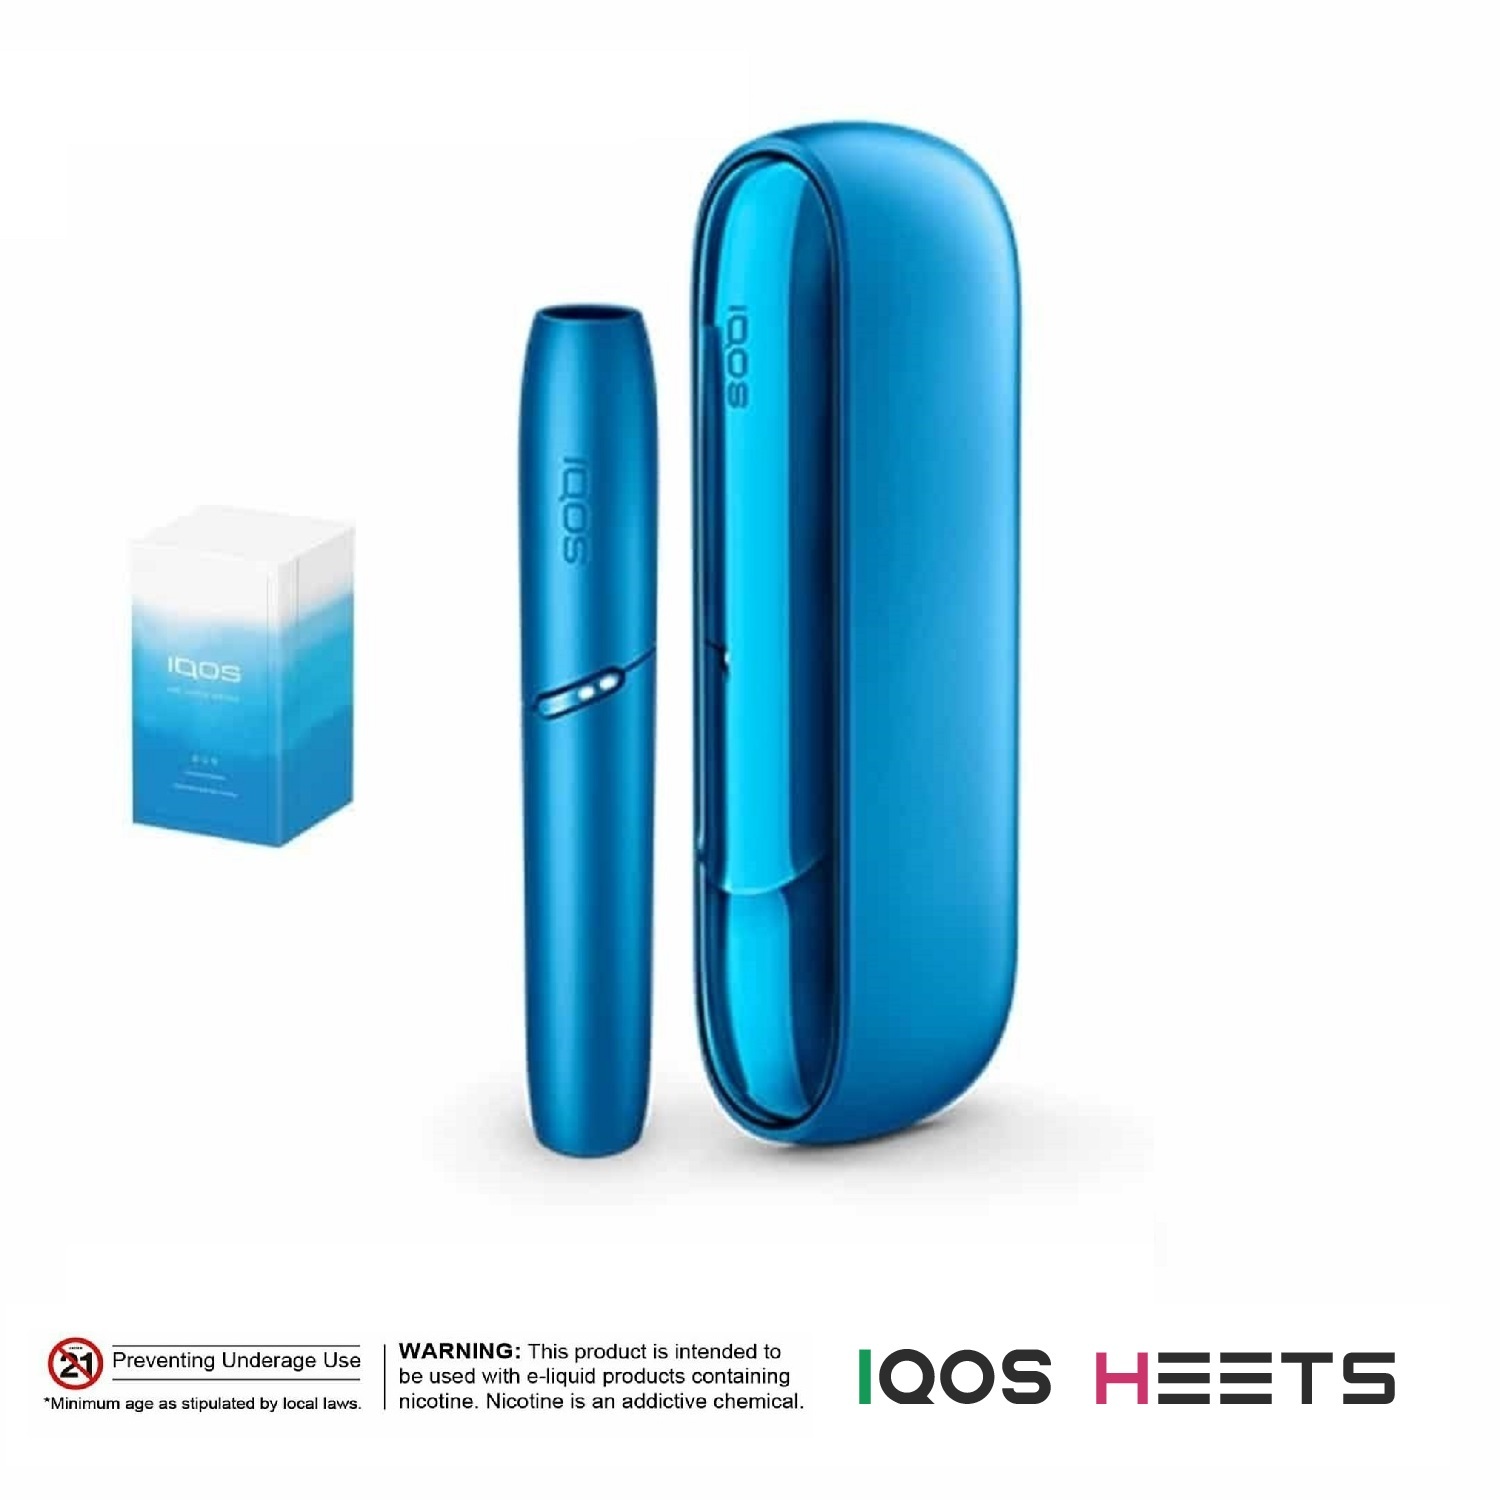 IQOS 3 DUO KIT RYO Limited Edition - iqos heets ae